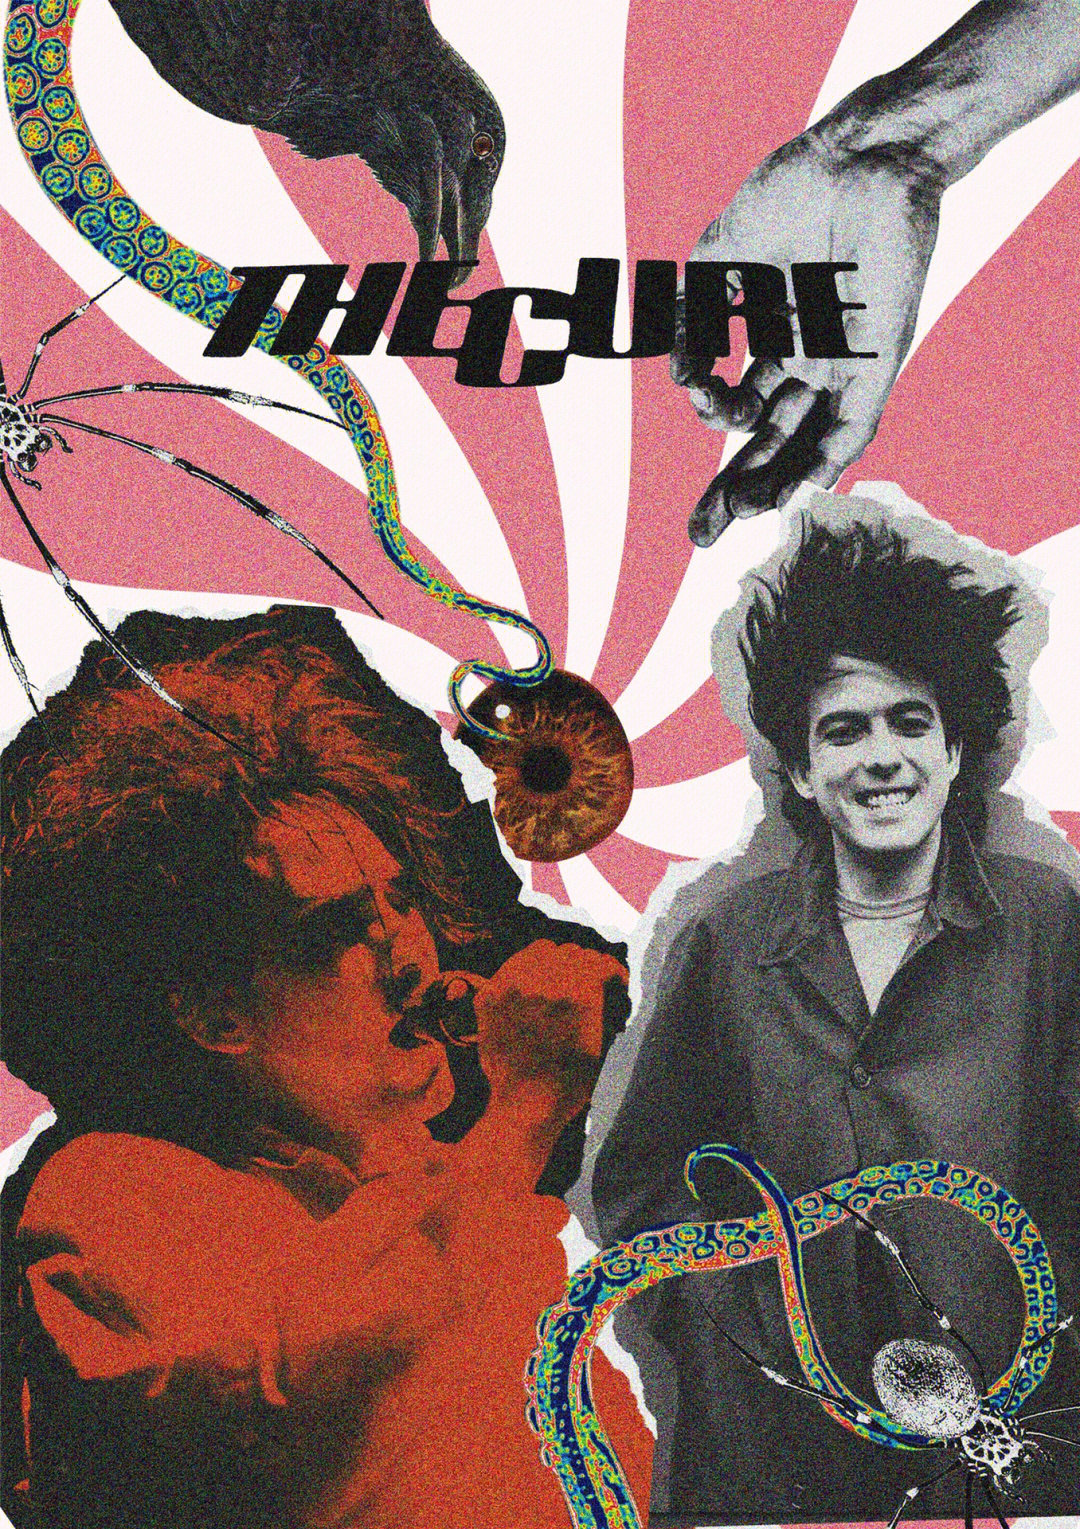 thecure主唱图片